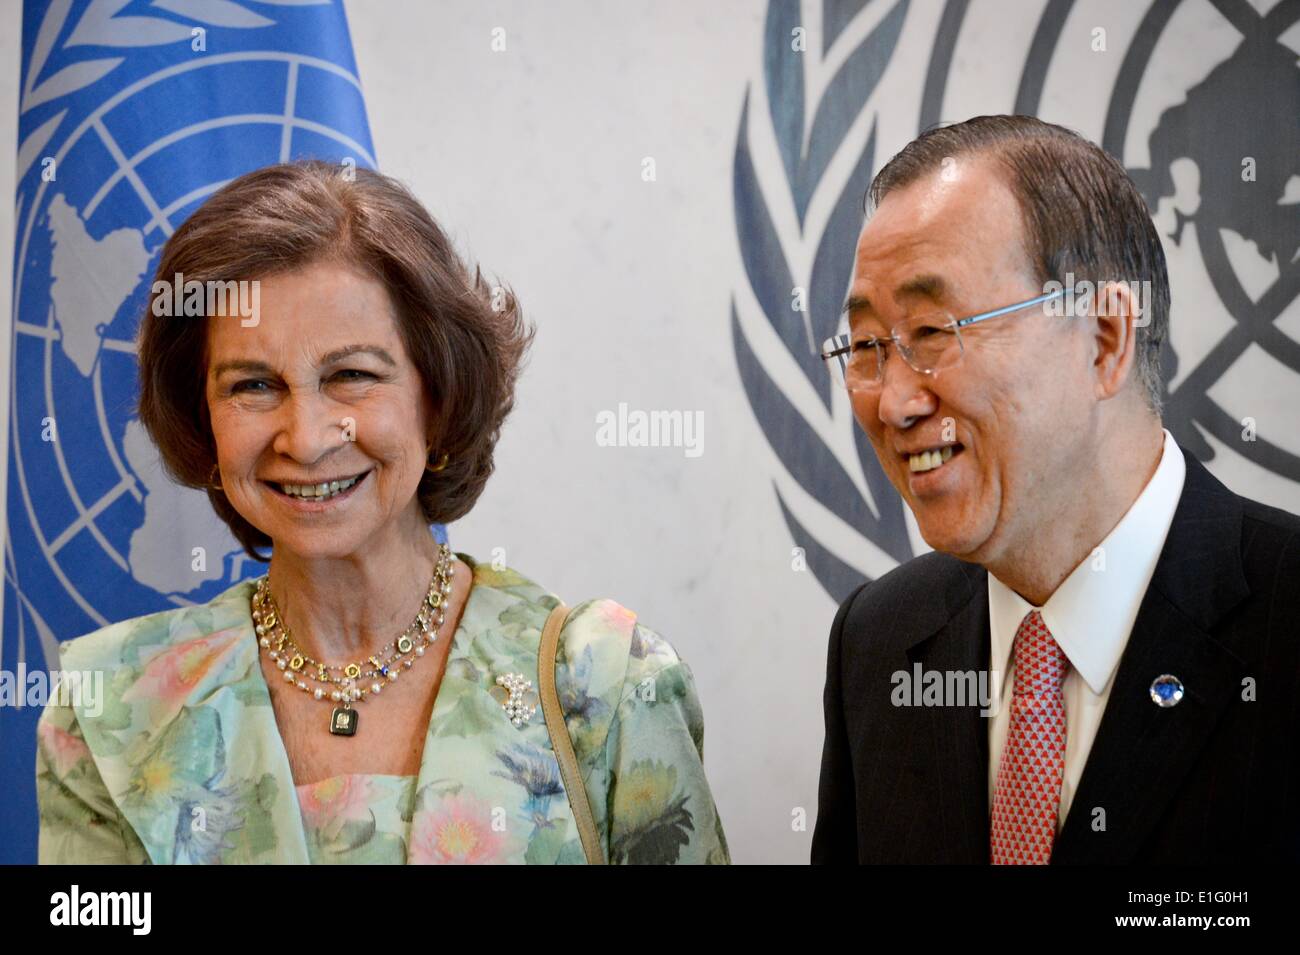 New York, USA. 3rd June, 2014. United Nations Secretary-General Ban Ki-moon (R) poses for photos with Queen Sofia of Spain prior to their meeting at the UN headquarters in New York, on June 3, 2014, a day after King Juan Carlos of Spain announced his abdication in favor of his son, the 46-year-old Crown Prince Felipe. Credit:  Niu Xiaolei/Xinhua/Alamy Live News Stock Photo